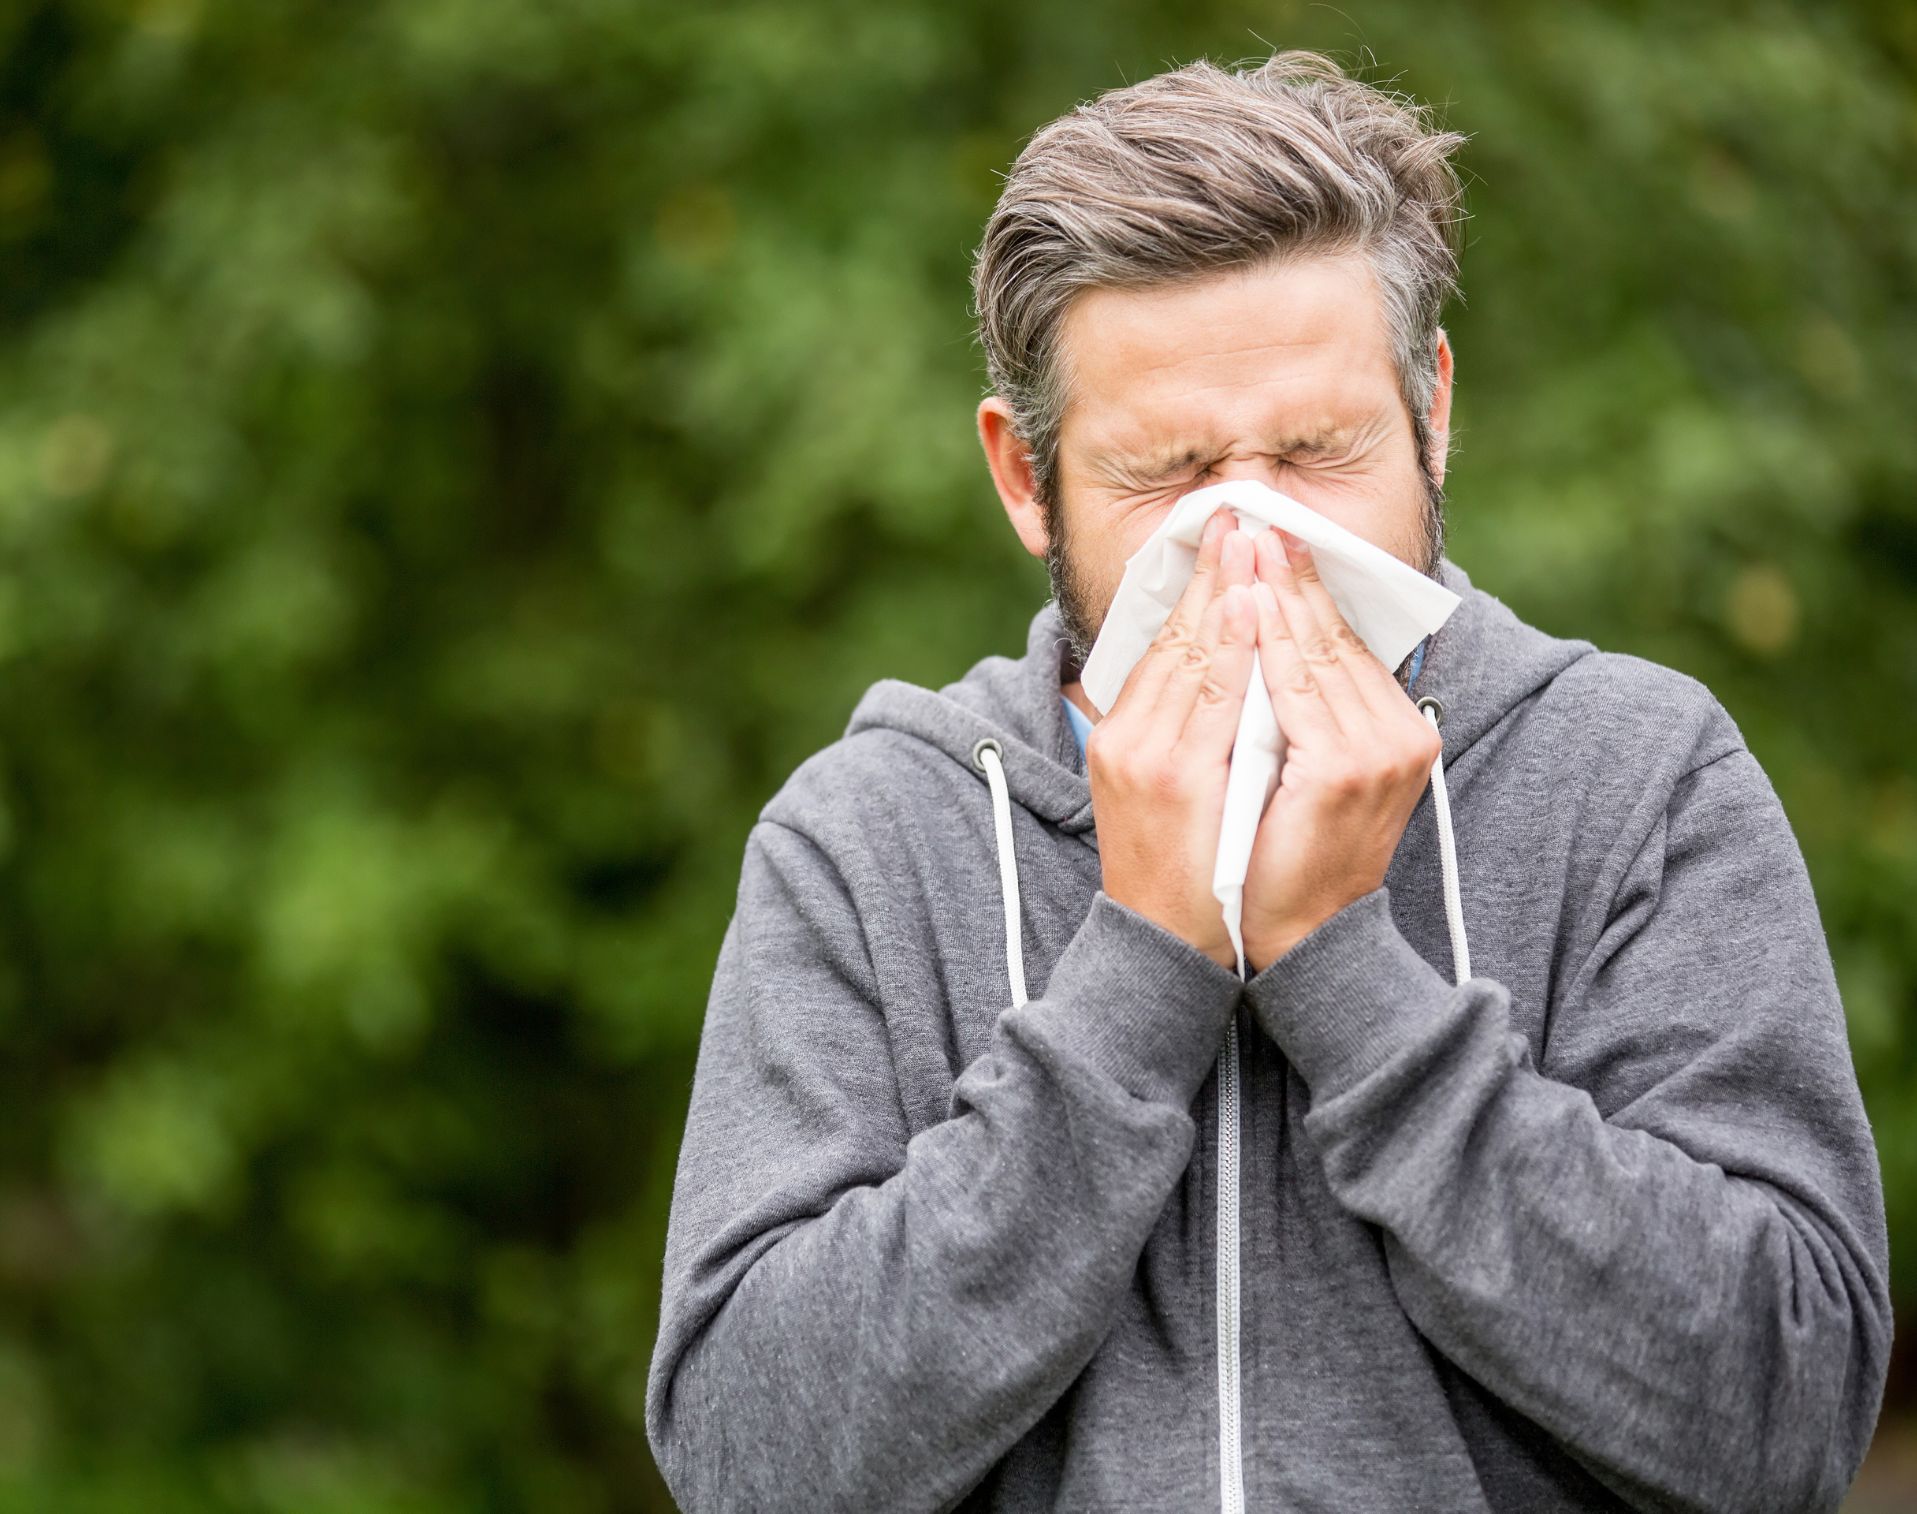 Seasonal hay fever: what are the warning signs and what can I do about it?